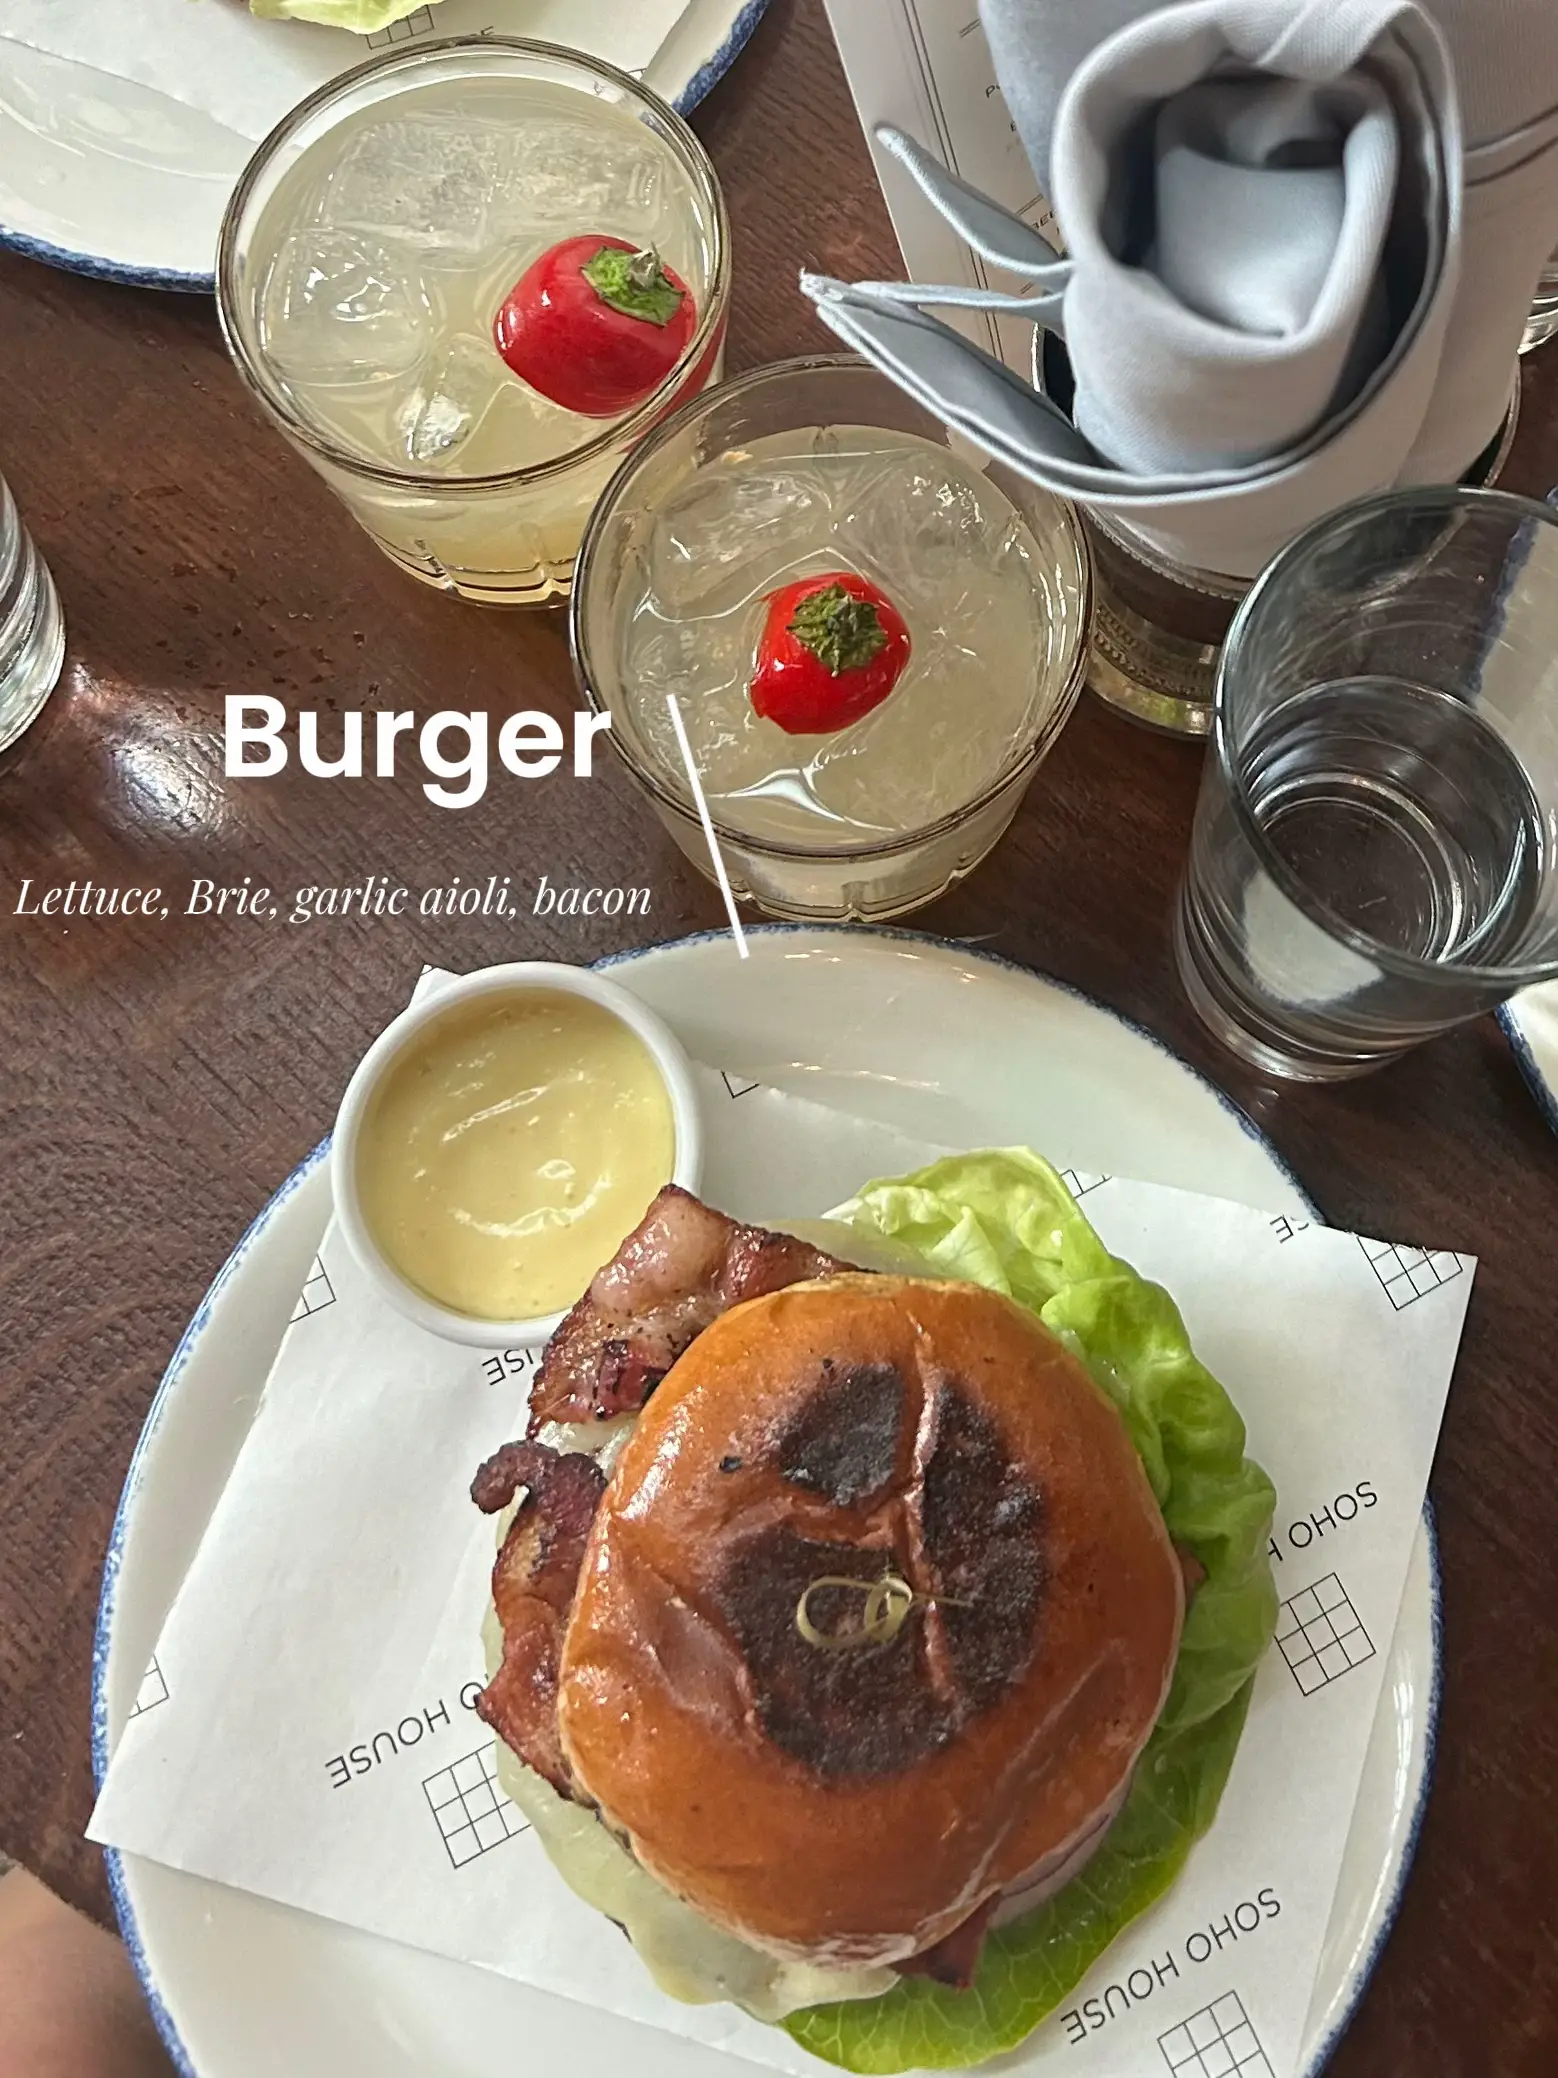  A close up of a plate with a burger and a drink.